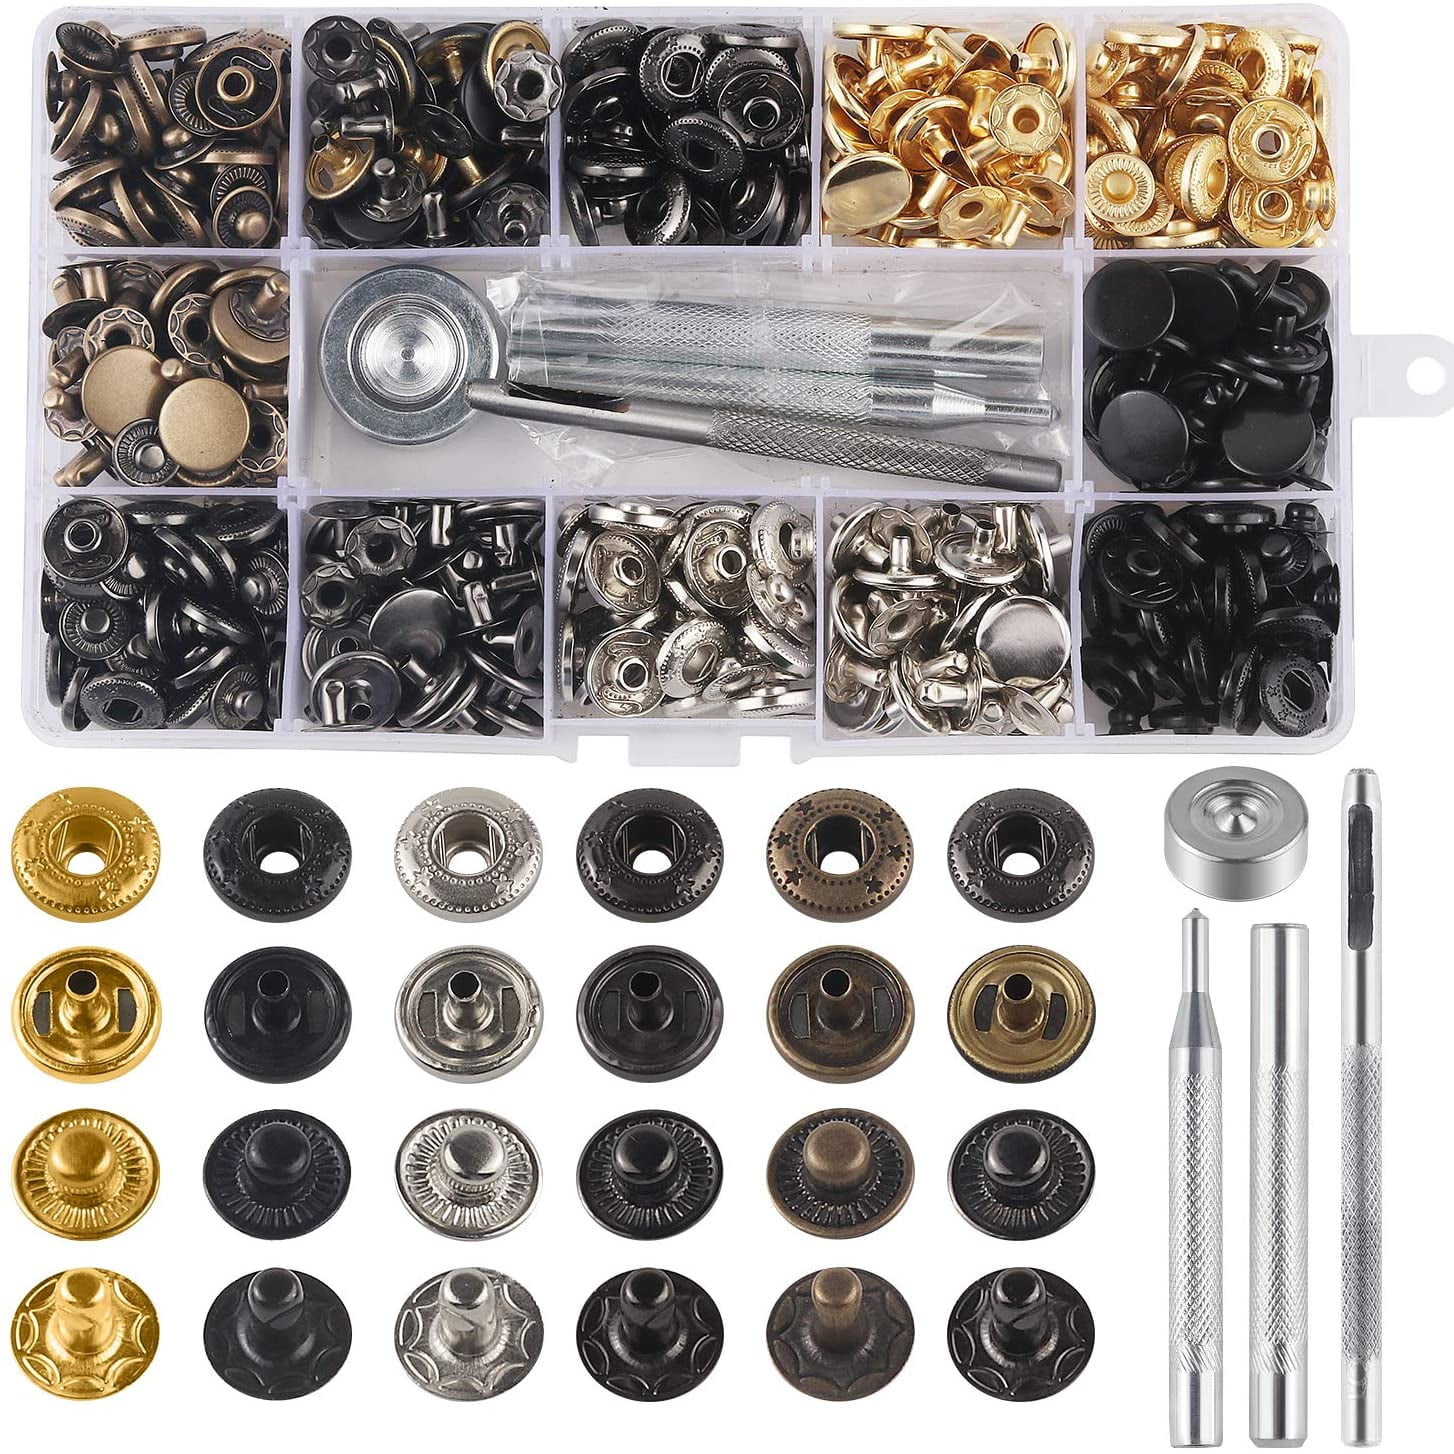 15 MM Heavy Duty Leather Snap Fasteners Kit, Press Studs with 4 Install  Tools, for Clothing, Leather, Jeans, Jackets, Bracelets - AliExpress